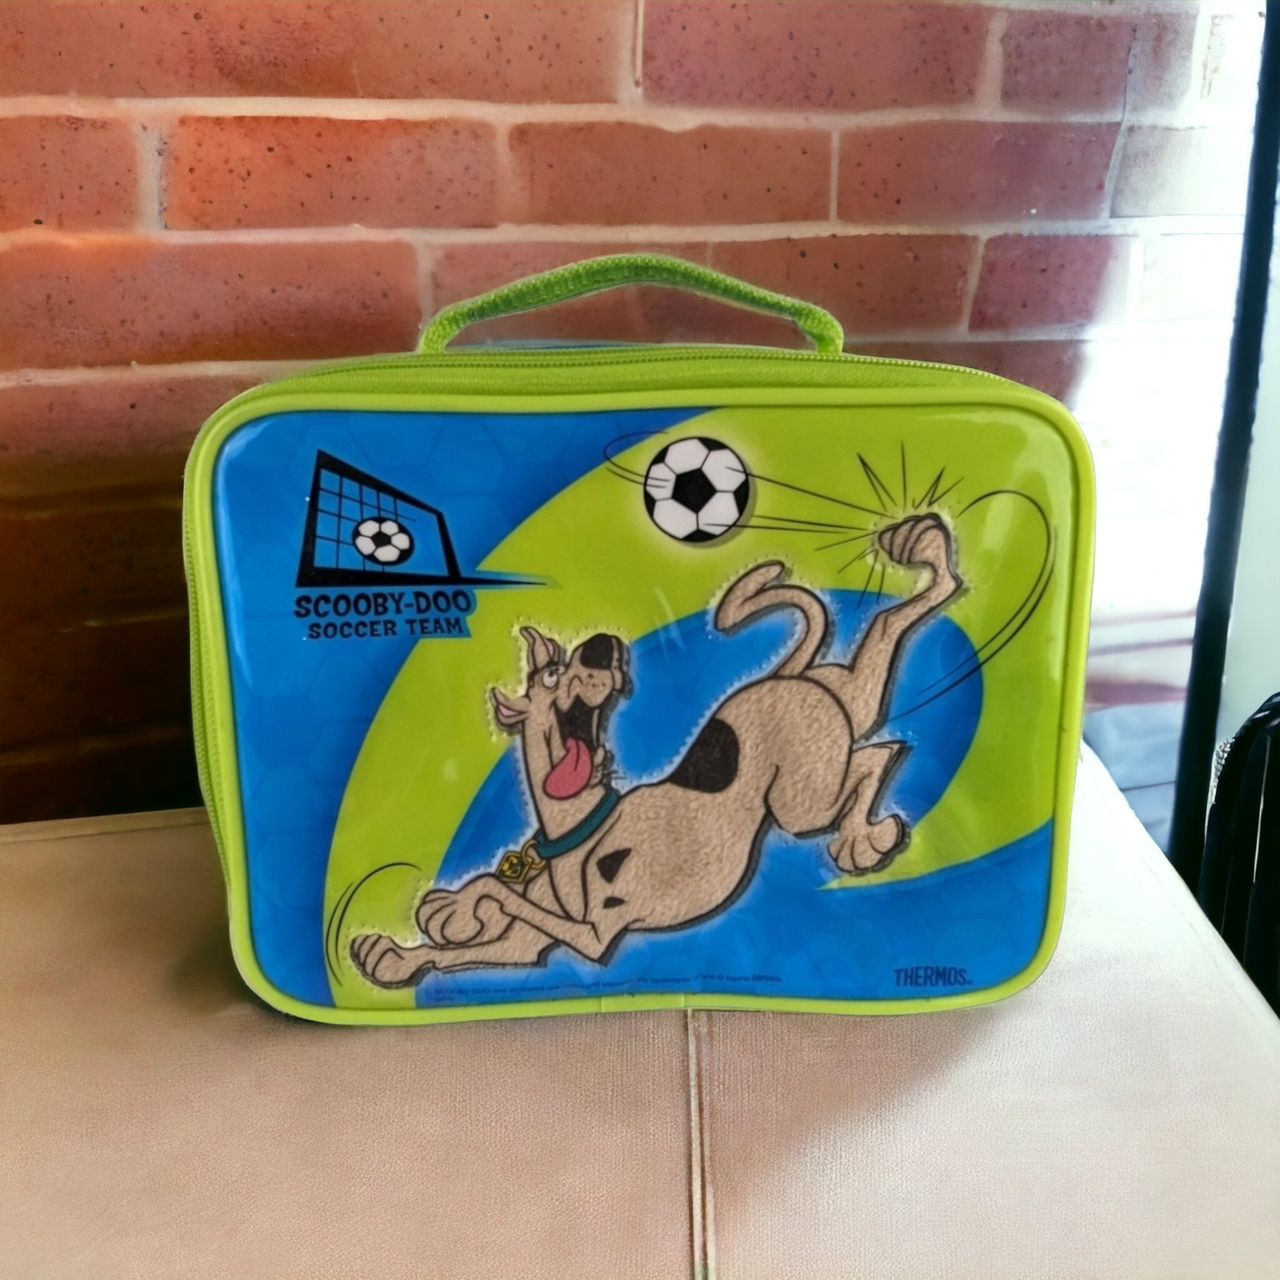  Scooby-Doo Scooby Snacks Dual Compartment Insulated Lunch Tote  Bag : Home & Kitchen